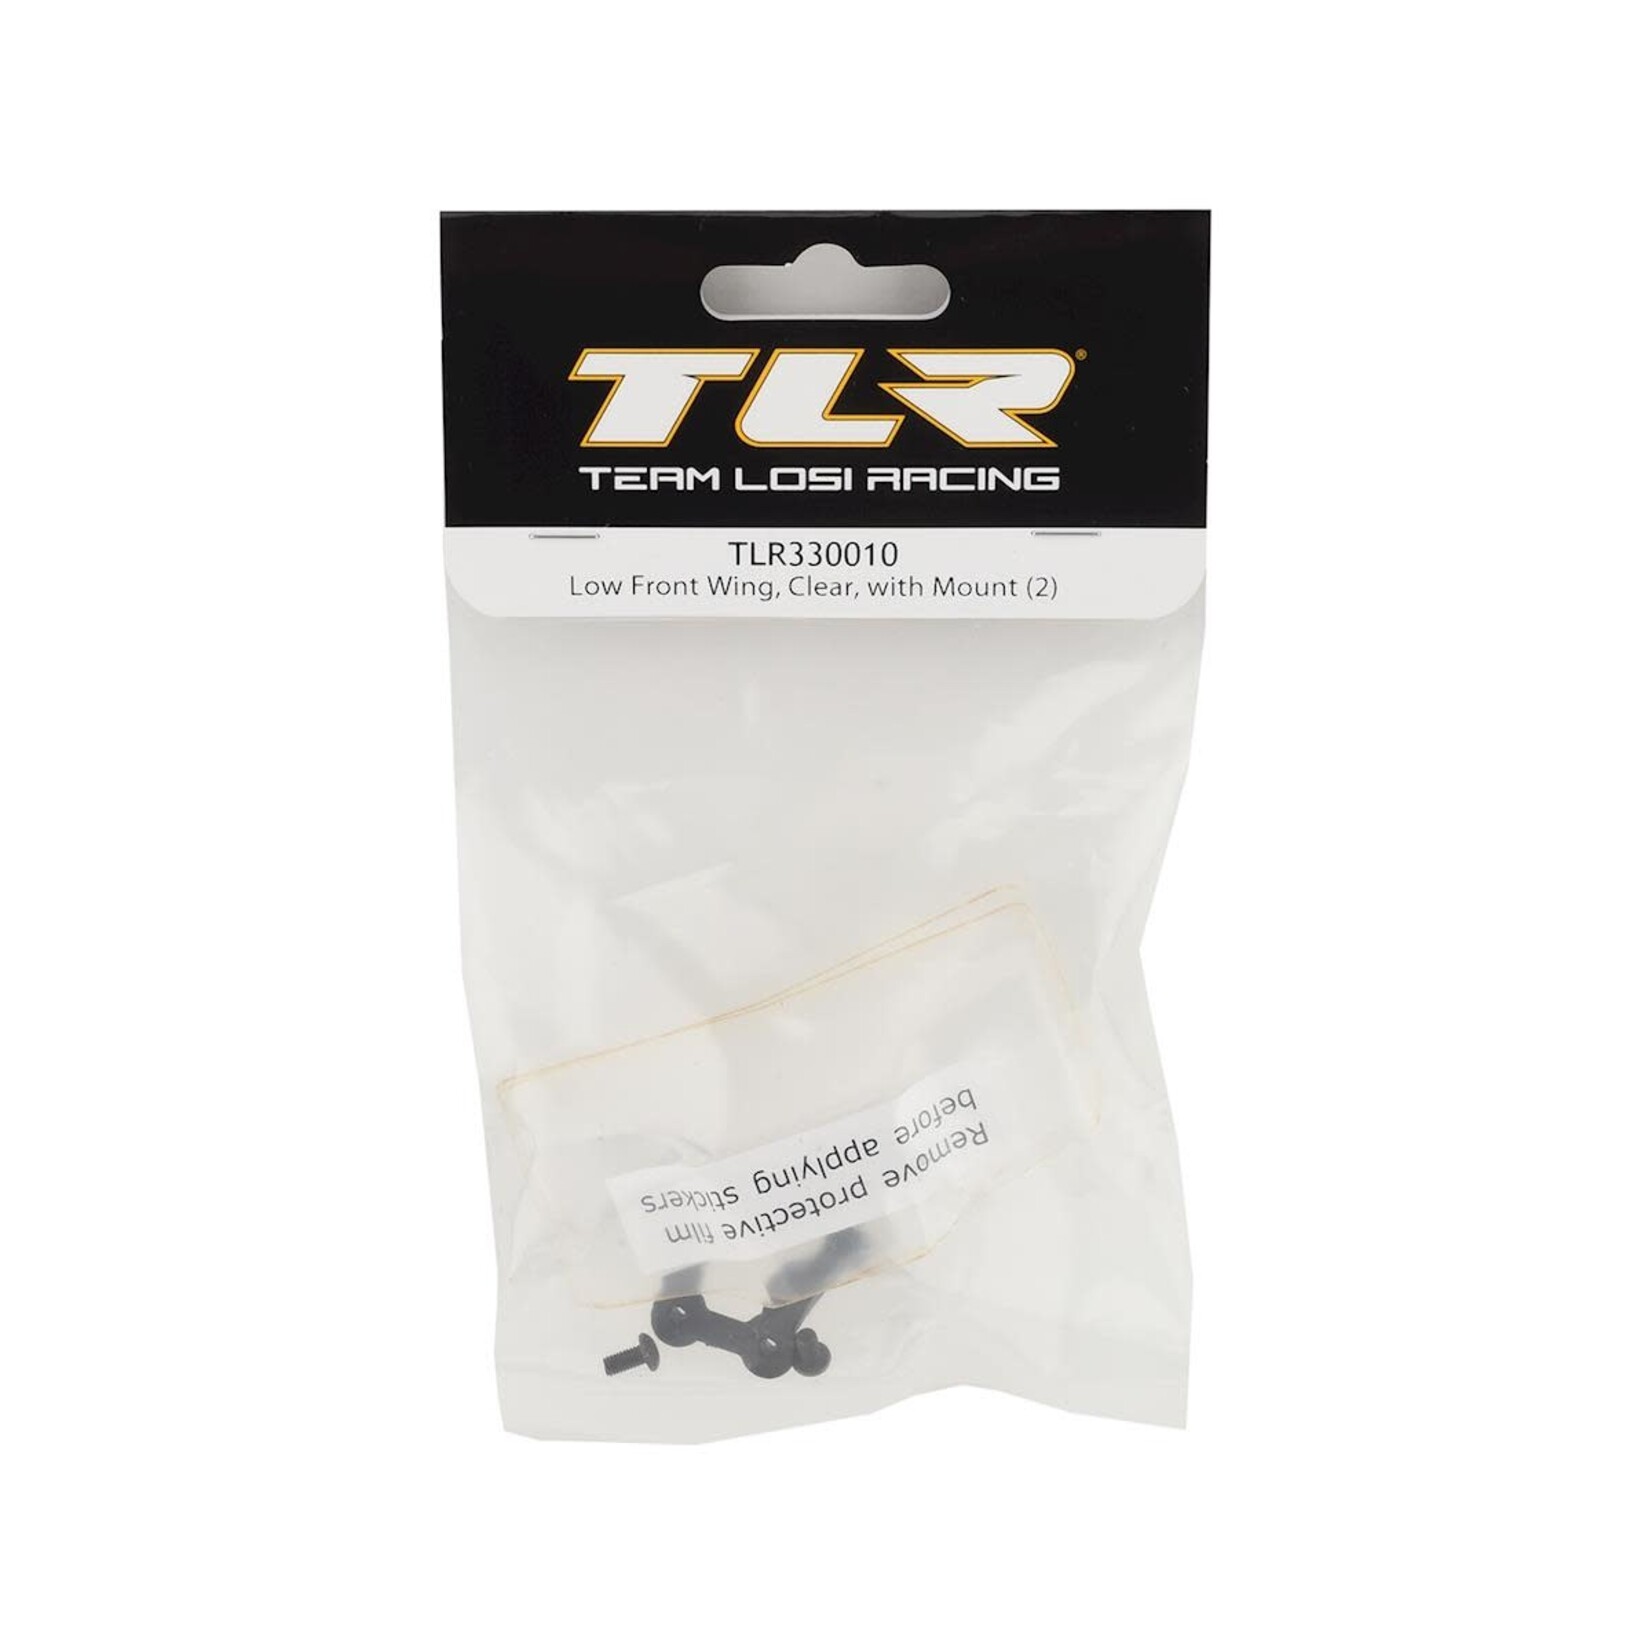 TLR Team Losi Racing Low Front Wing w/Mount (Clear) (2)  #TLR330010